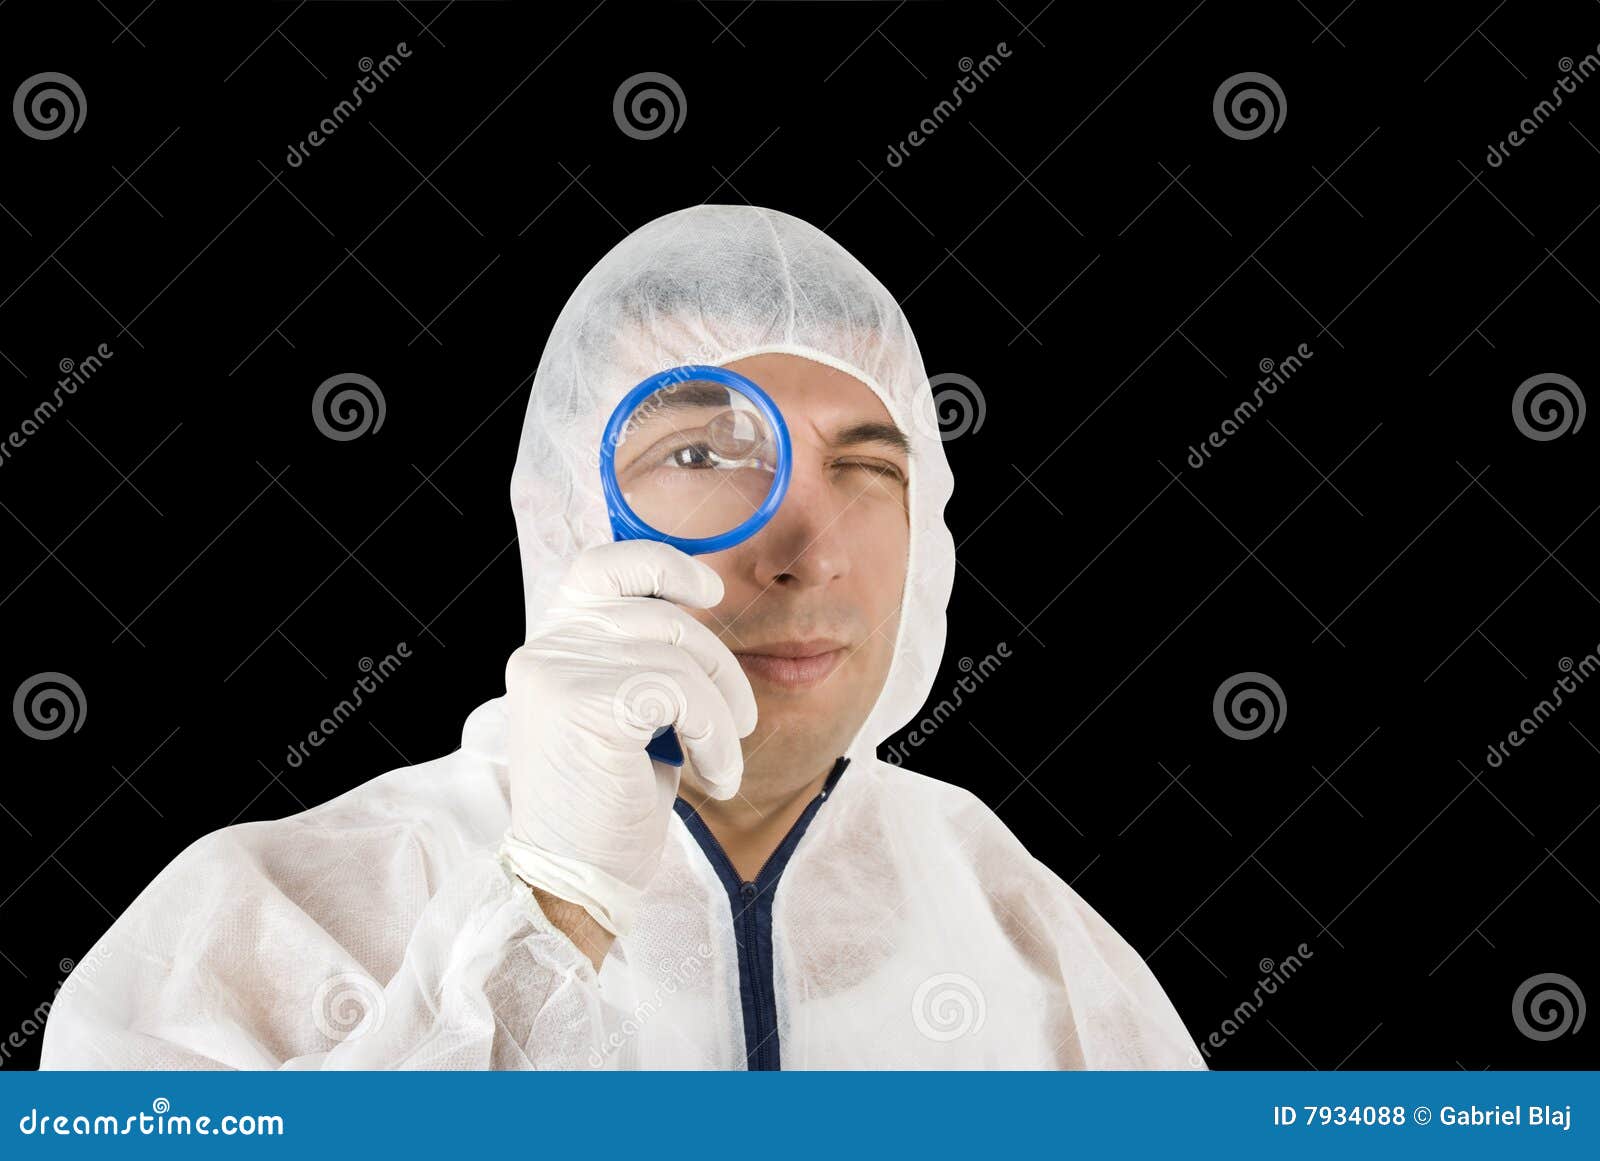 criminologist with magnifier